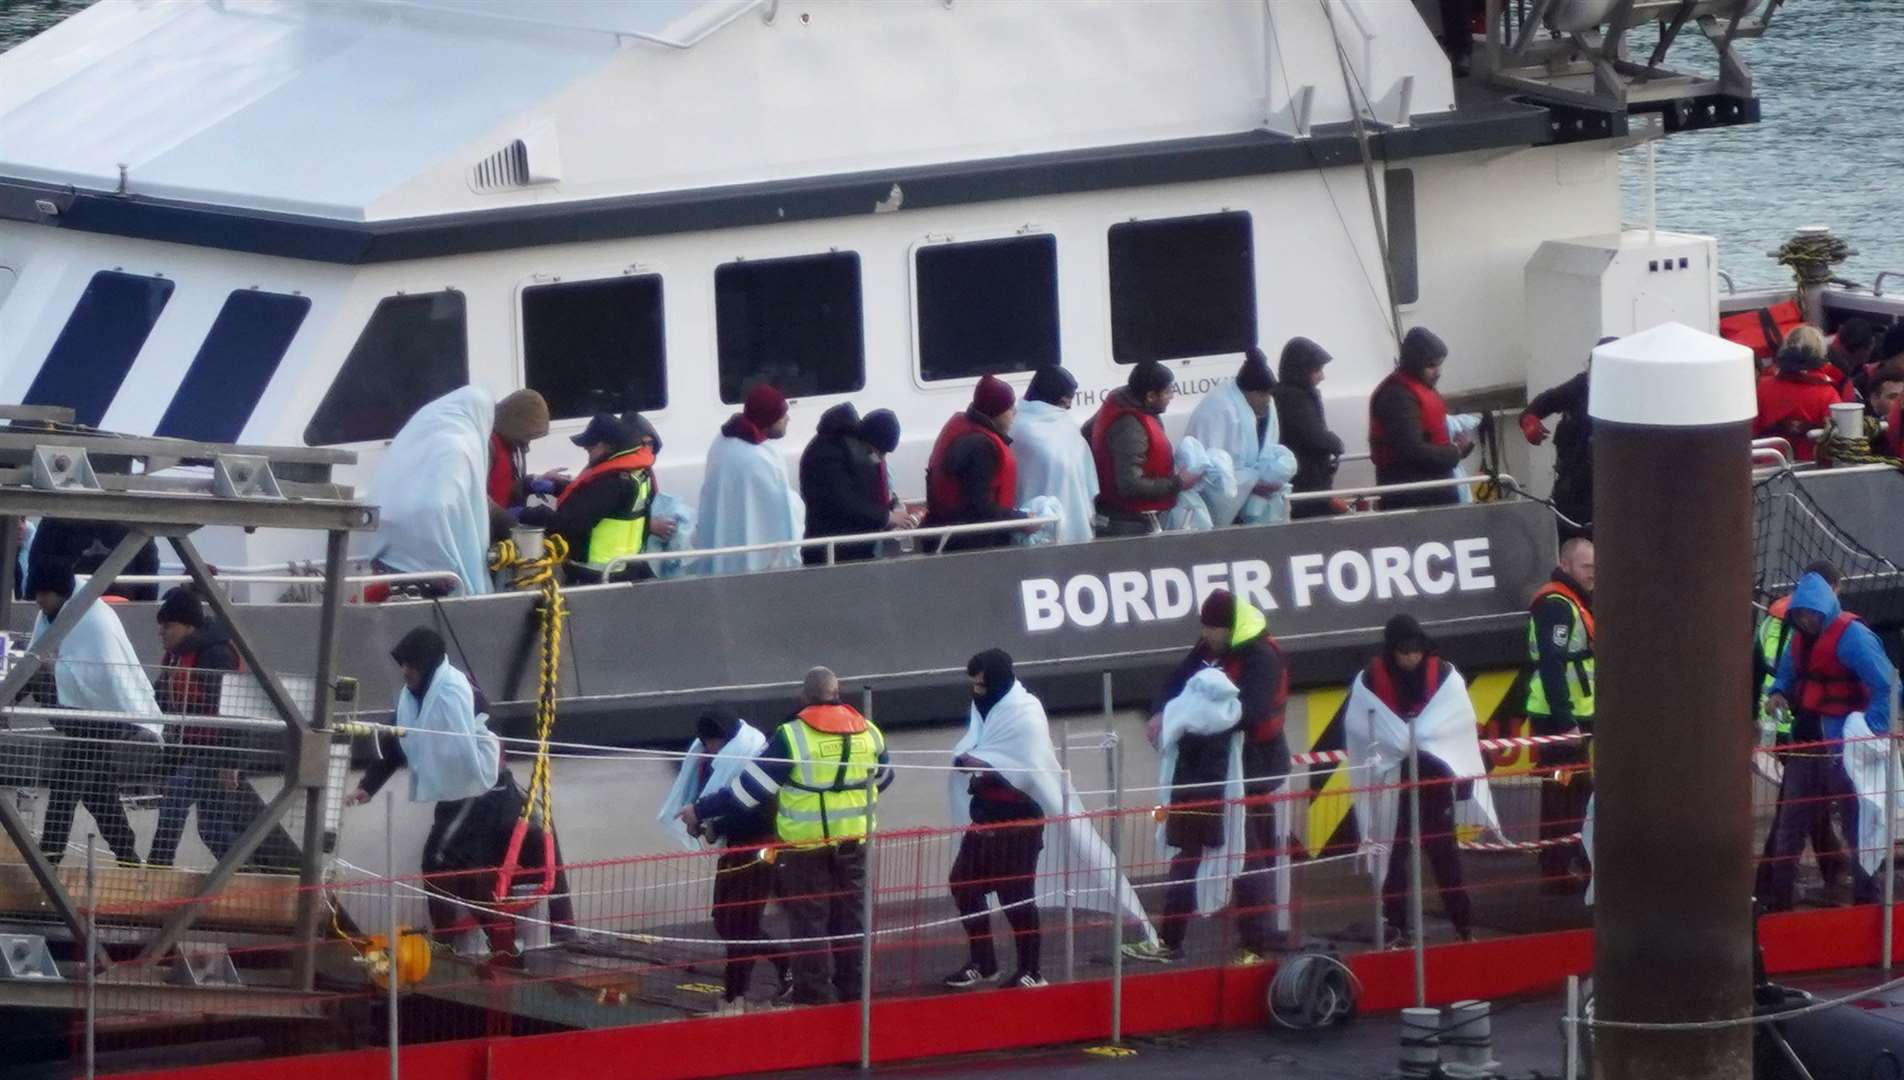 A group of people thought to be migrants are brought in to Dover, Kent, on a Border Force vessel following a small boat incident in the Channel (Gareth Fuller/PA Wire)